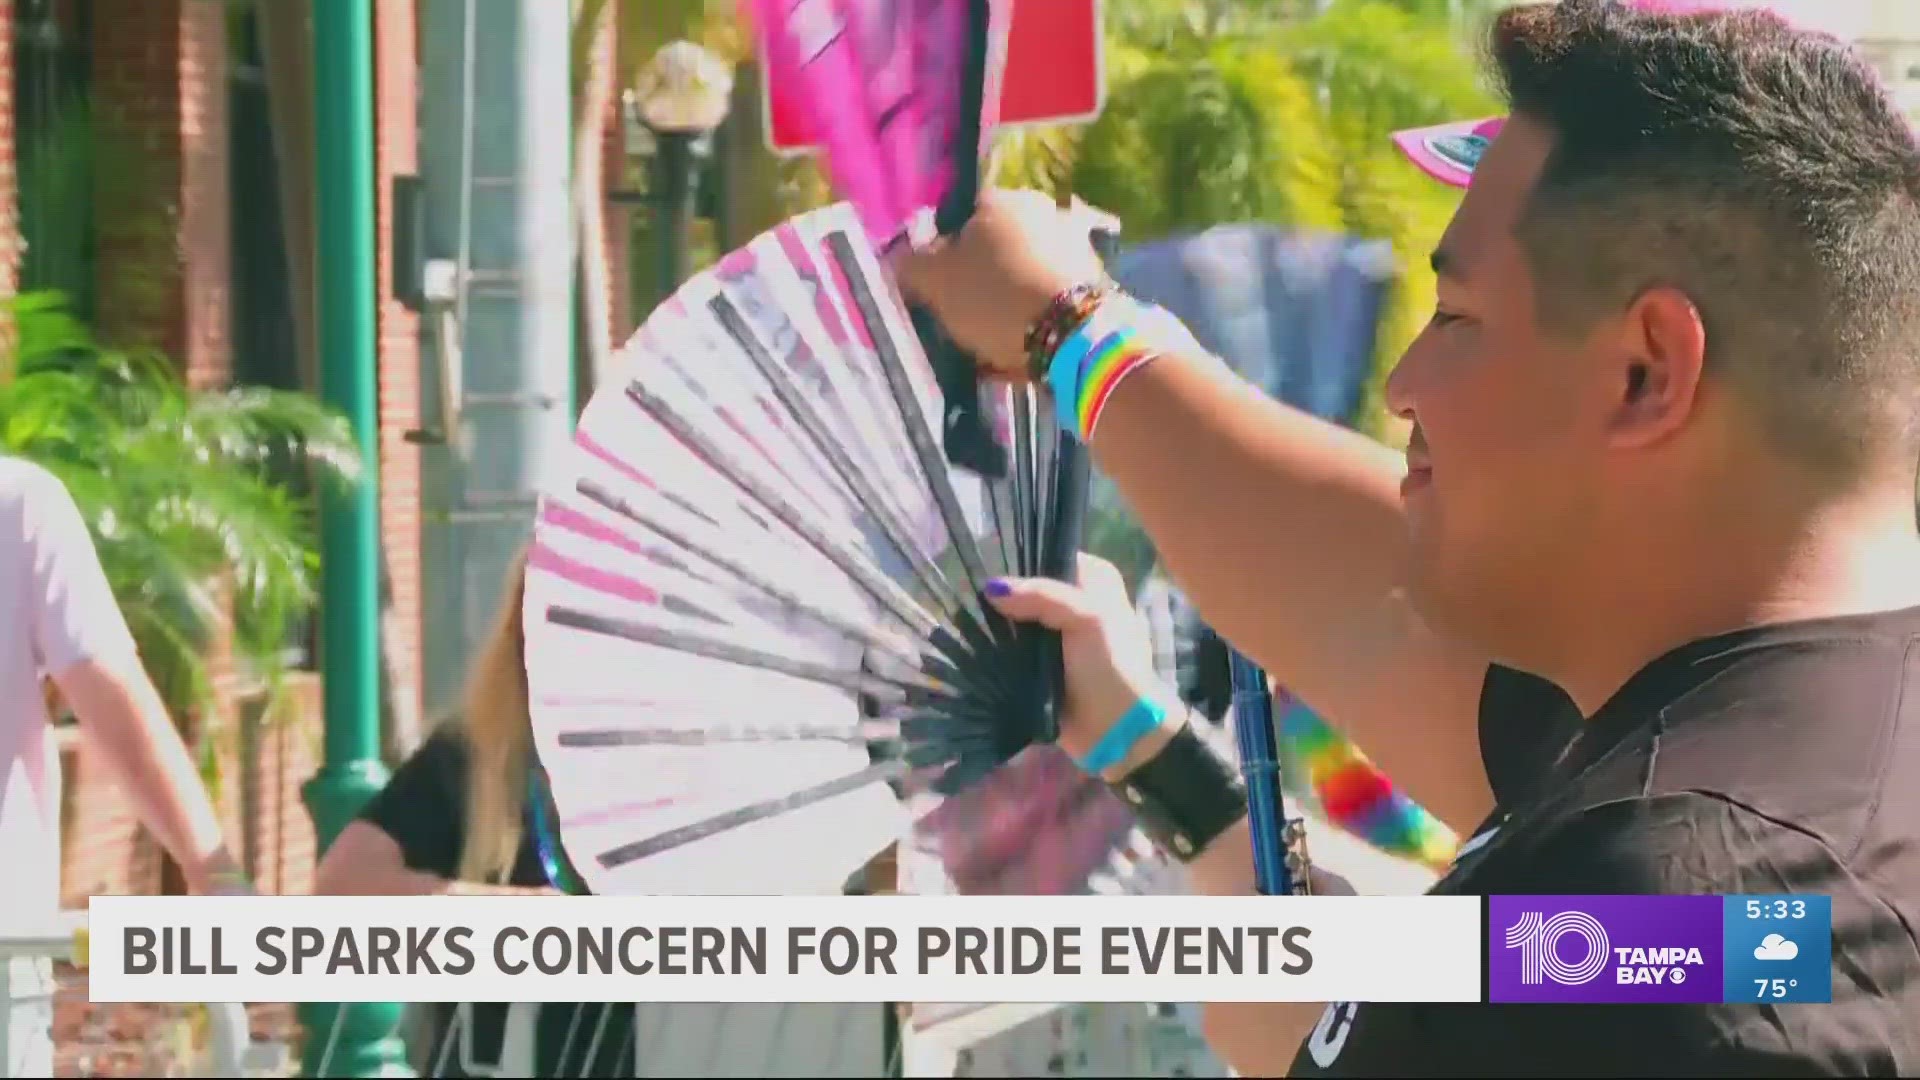 Pride event organizers in the Tampa Bay region say they’re concerned local governments could be intimidated into self-censoring.